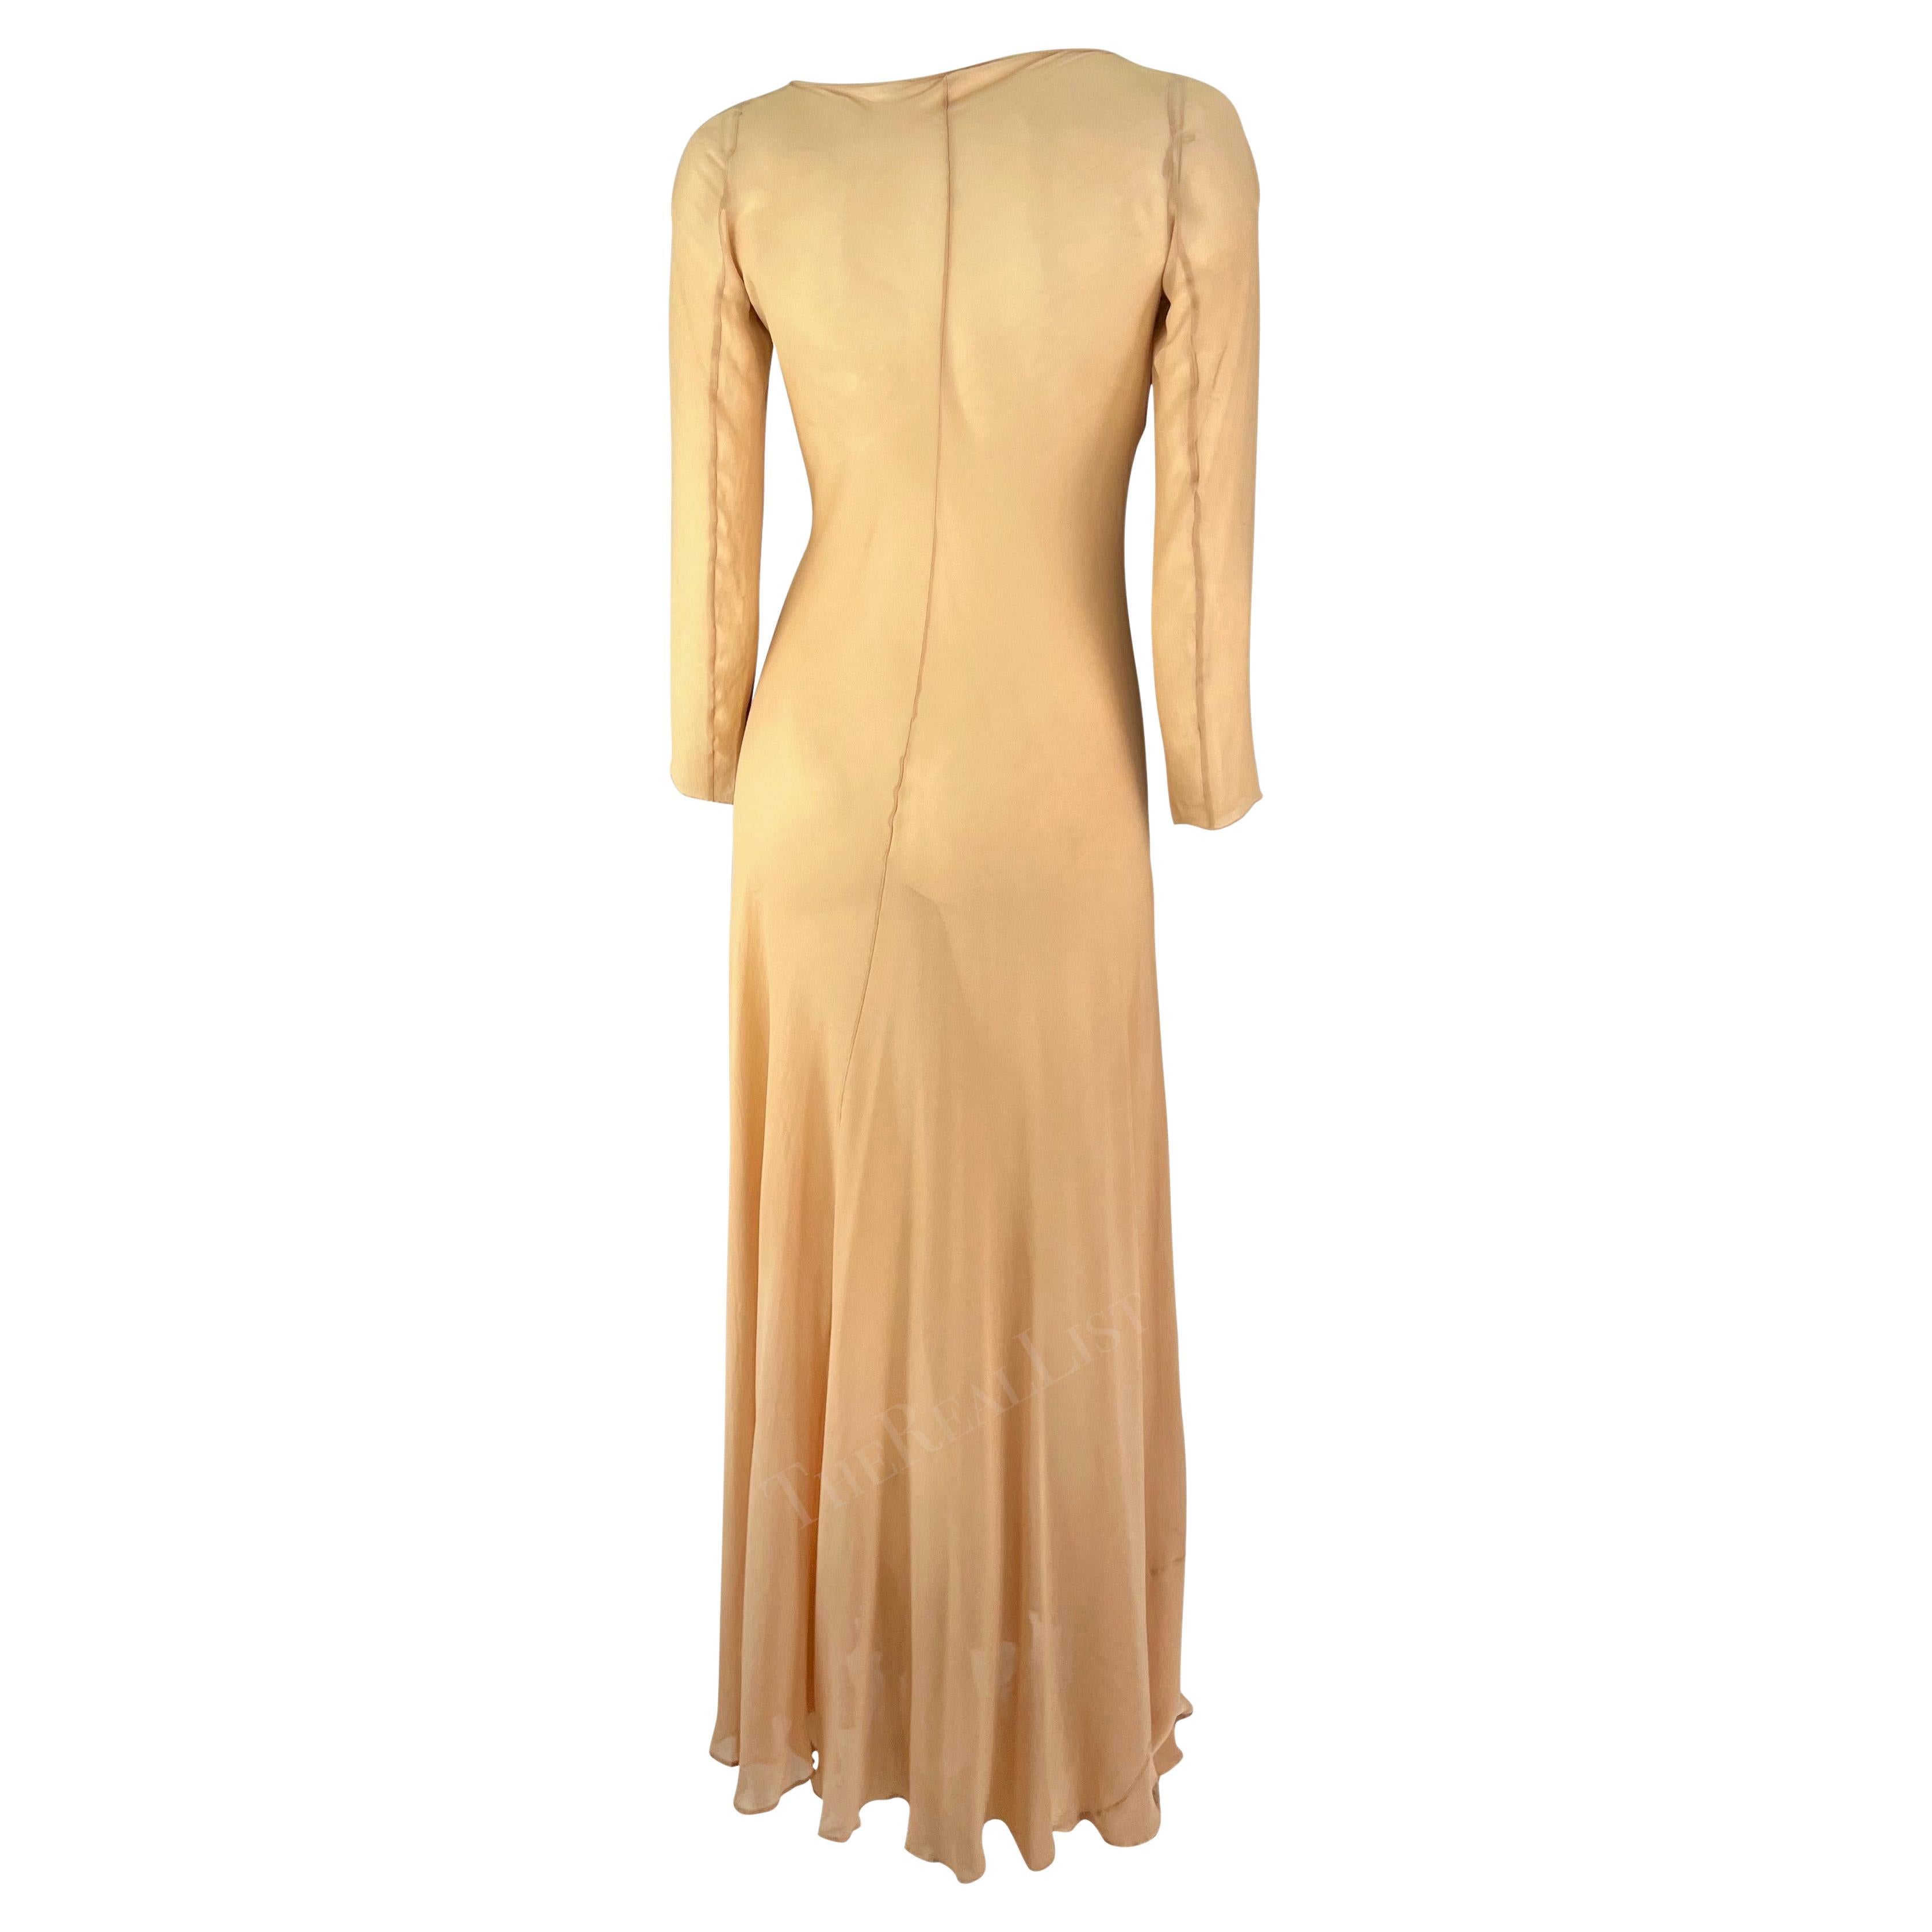 S/S 1998 Gucci by Tom Ford Beige Sheer Wrap Floor Length Sample Gown  For Sale 1